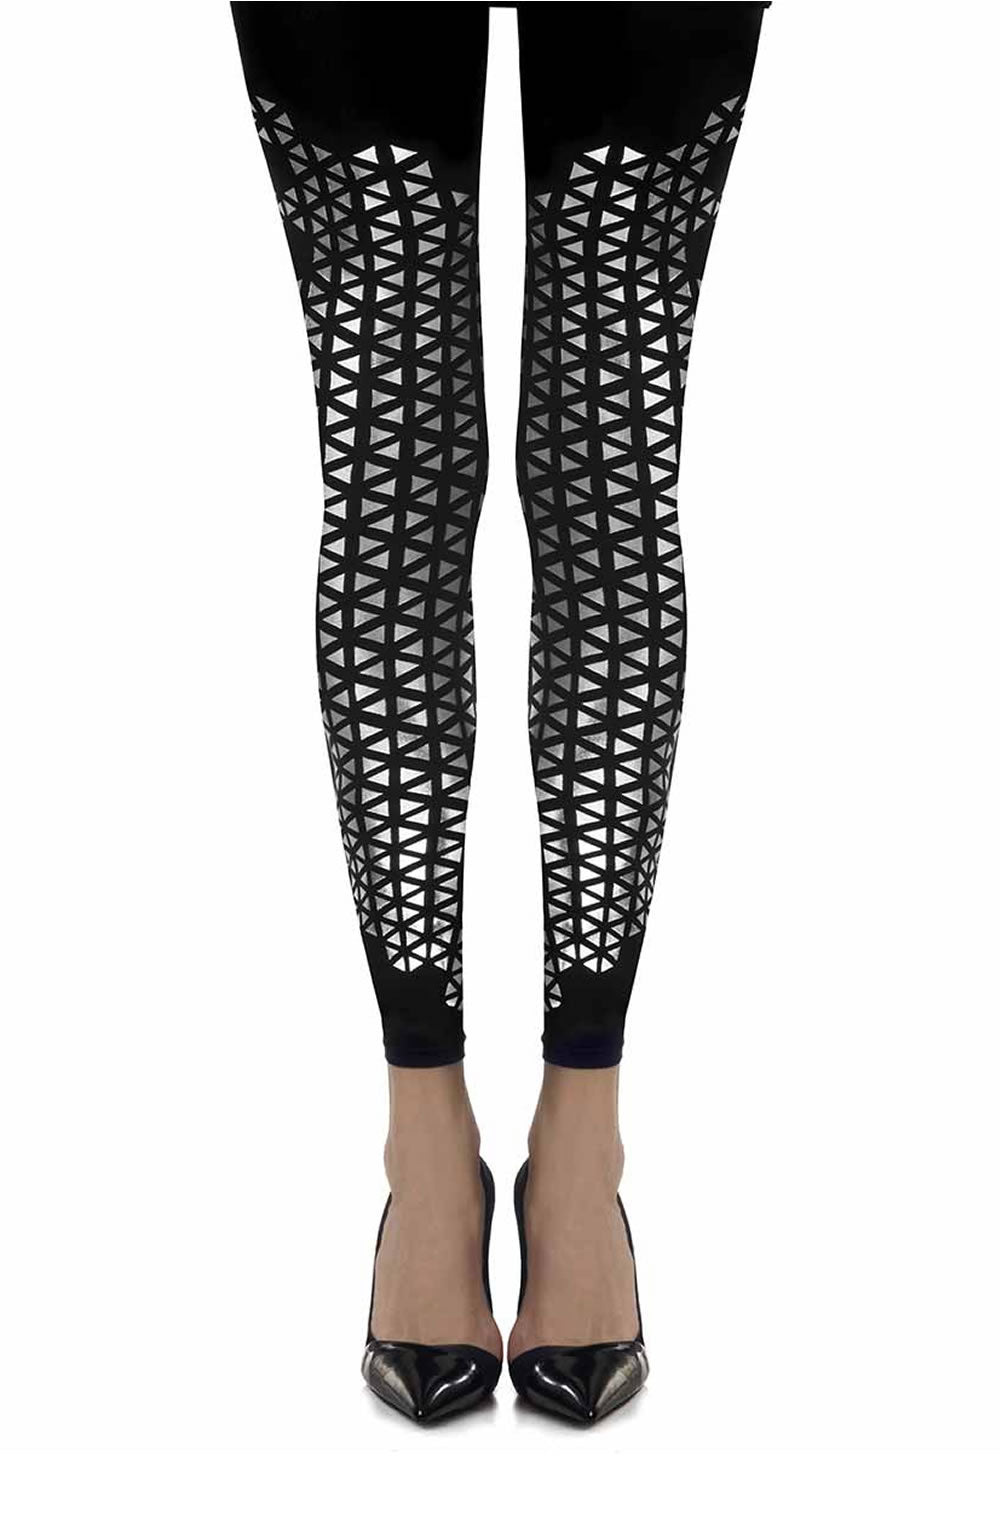 Zohara “Beat Goes On” Black Print Footless Tights  Hosiery, Leggings, NEWLY-IMPORTED, Tights, Zohara - So Luxe Lingerie